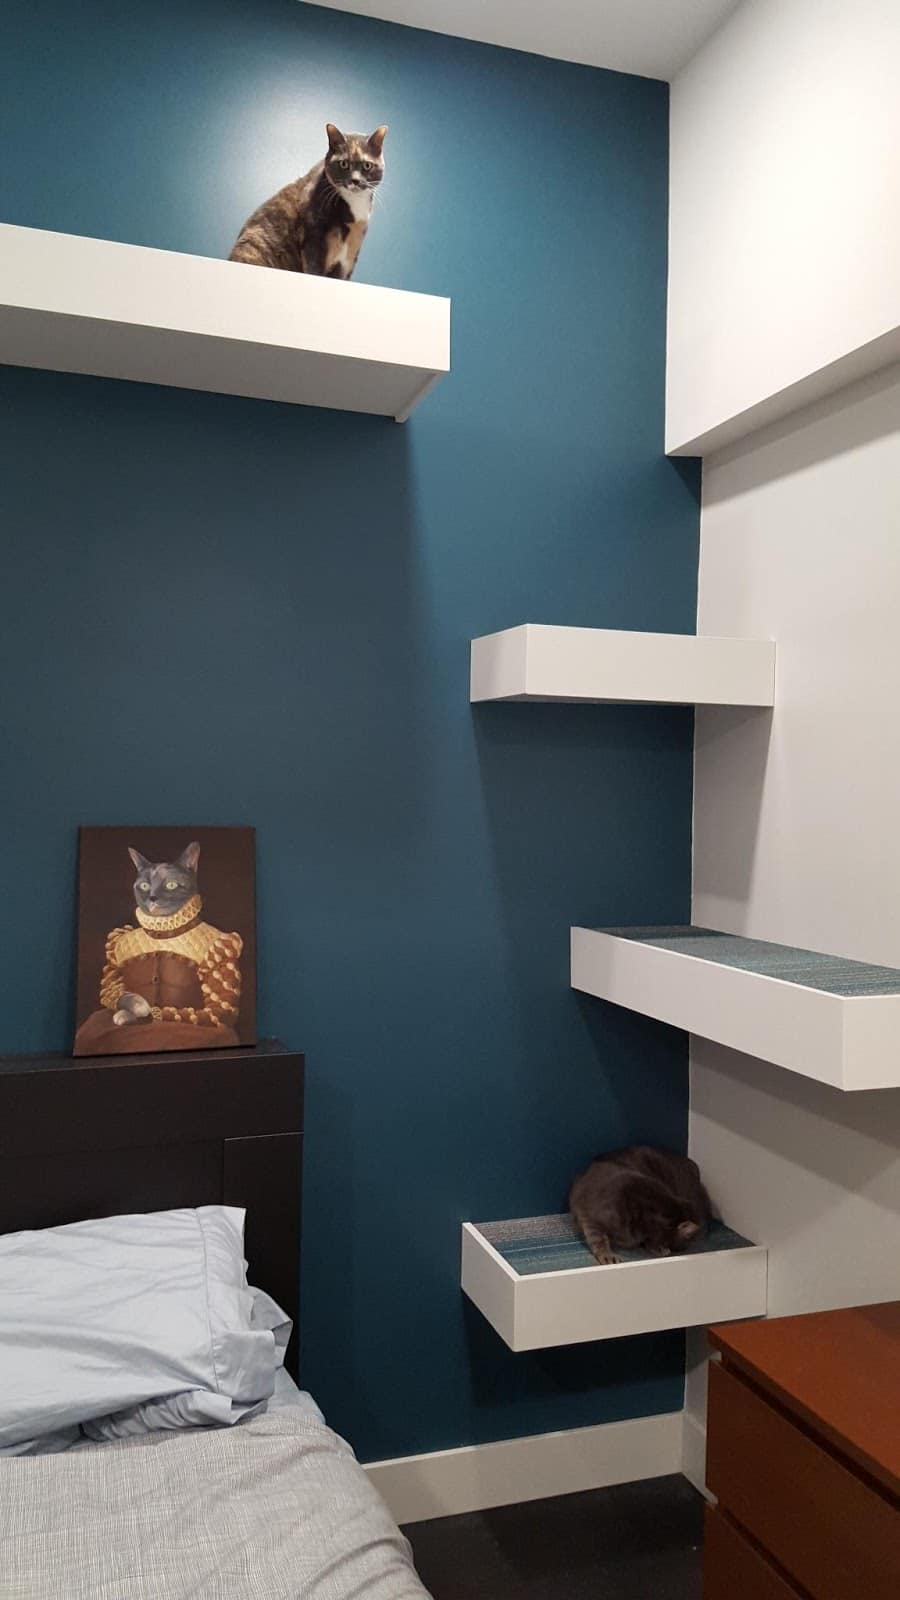 Install high shelves with carpet lining for your cats to perch on